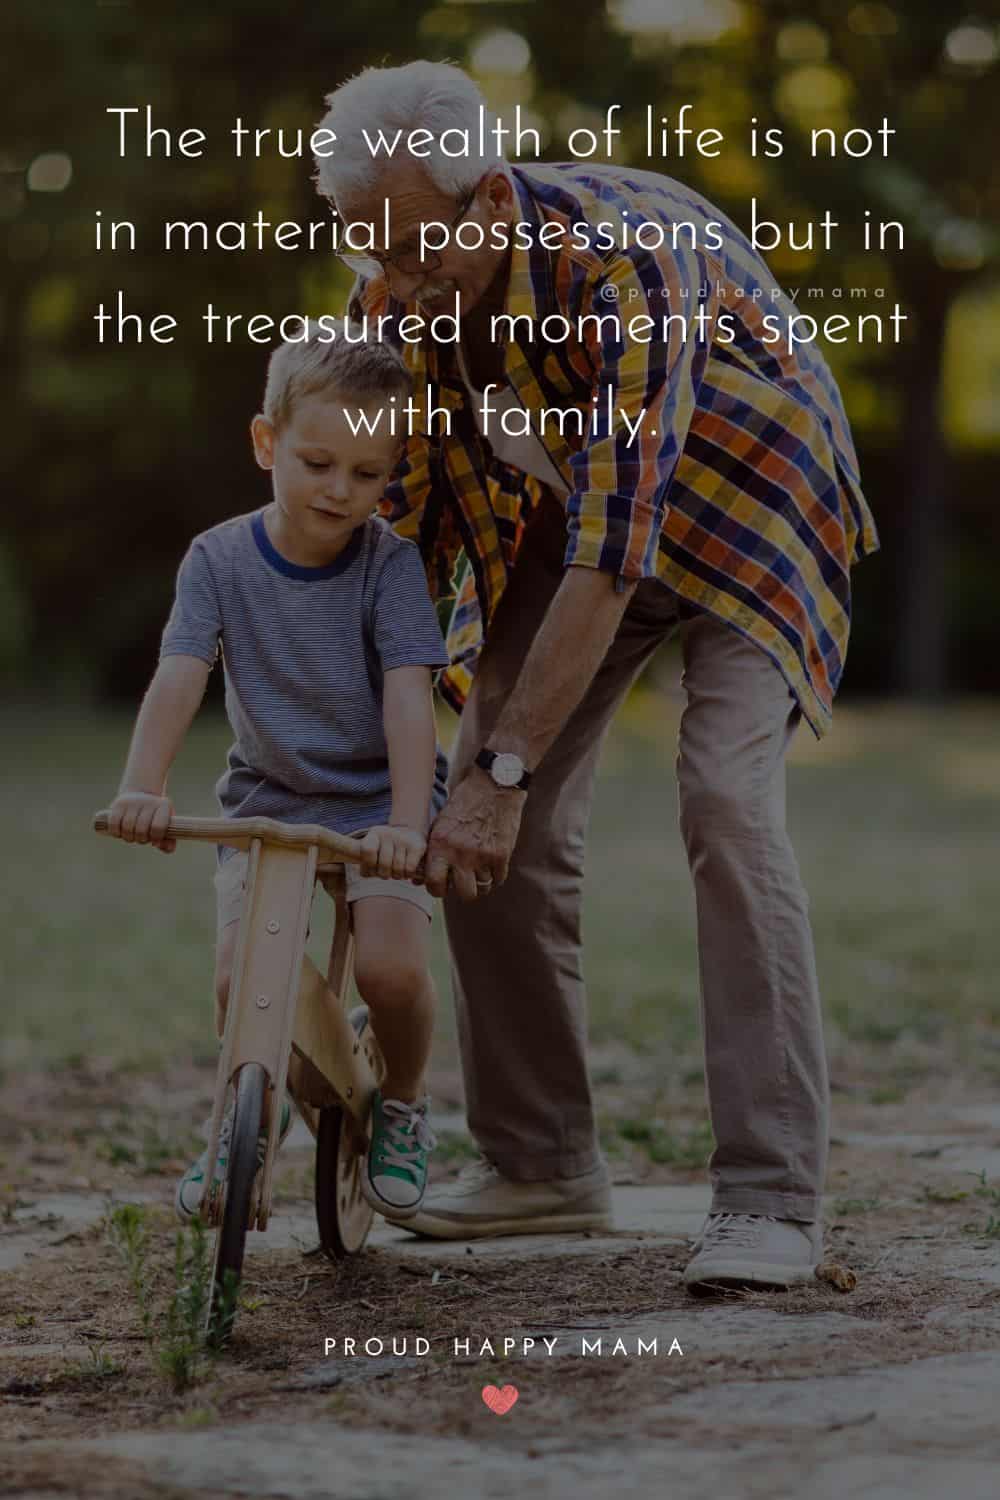 time with family quotes - The true wealth of life is not in material possessions but in the treasured moments spent with family.